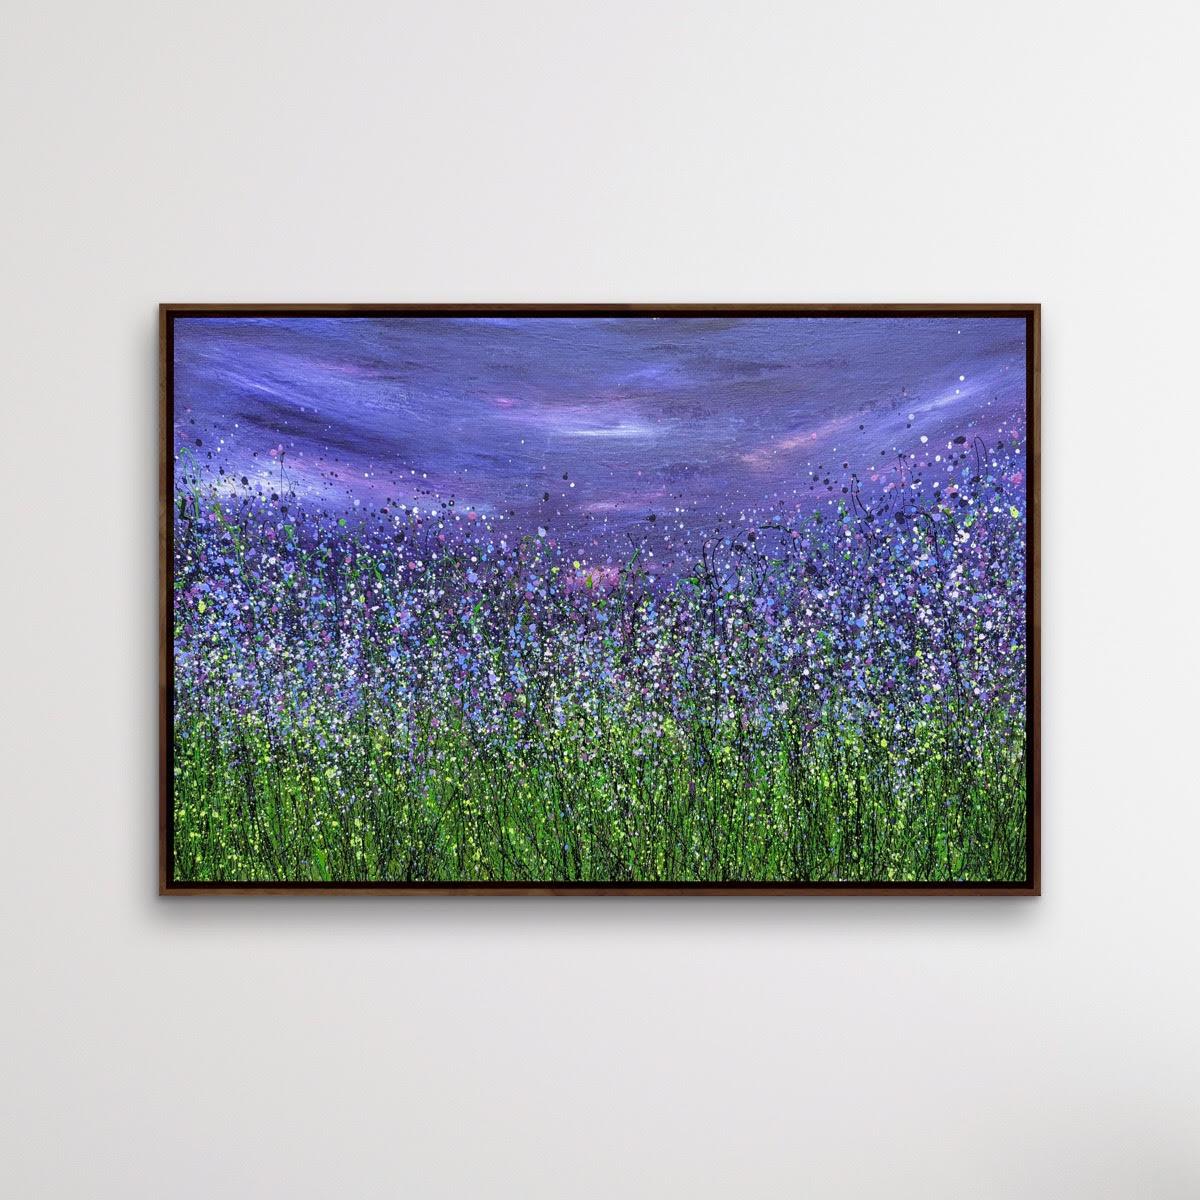 Amethyst Aurora Borealis #2 by Lucy Moore [2022]
original and hand signed by the artist
Acrylic on canvas
Image size: H:61 cm x W:91 cm
Complete Size of Unframed Work: H:61 cm x W:91 cm x D:1.5cm
Sold Unframed
Please note that insitu images are